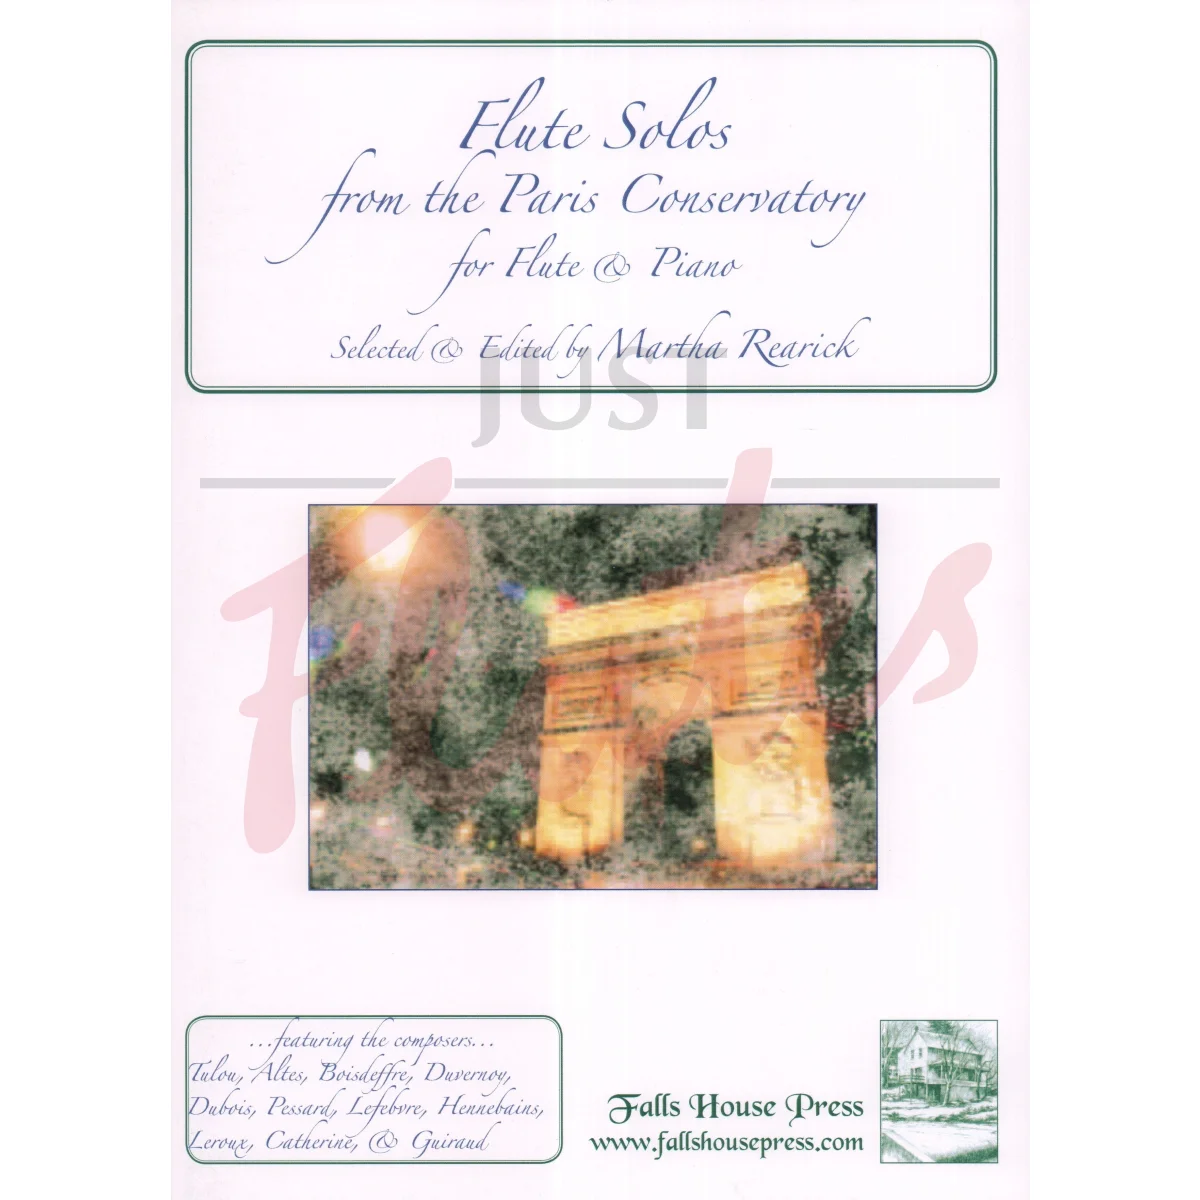 Flute Solos from the Paris Conservatoire for Flute and Piano